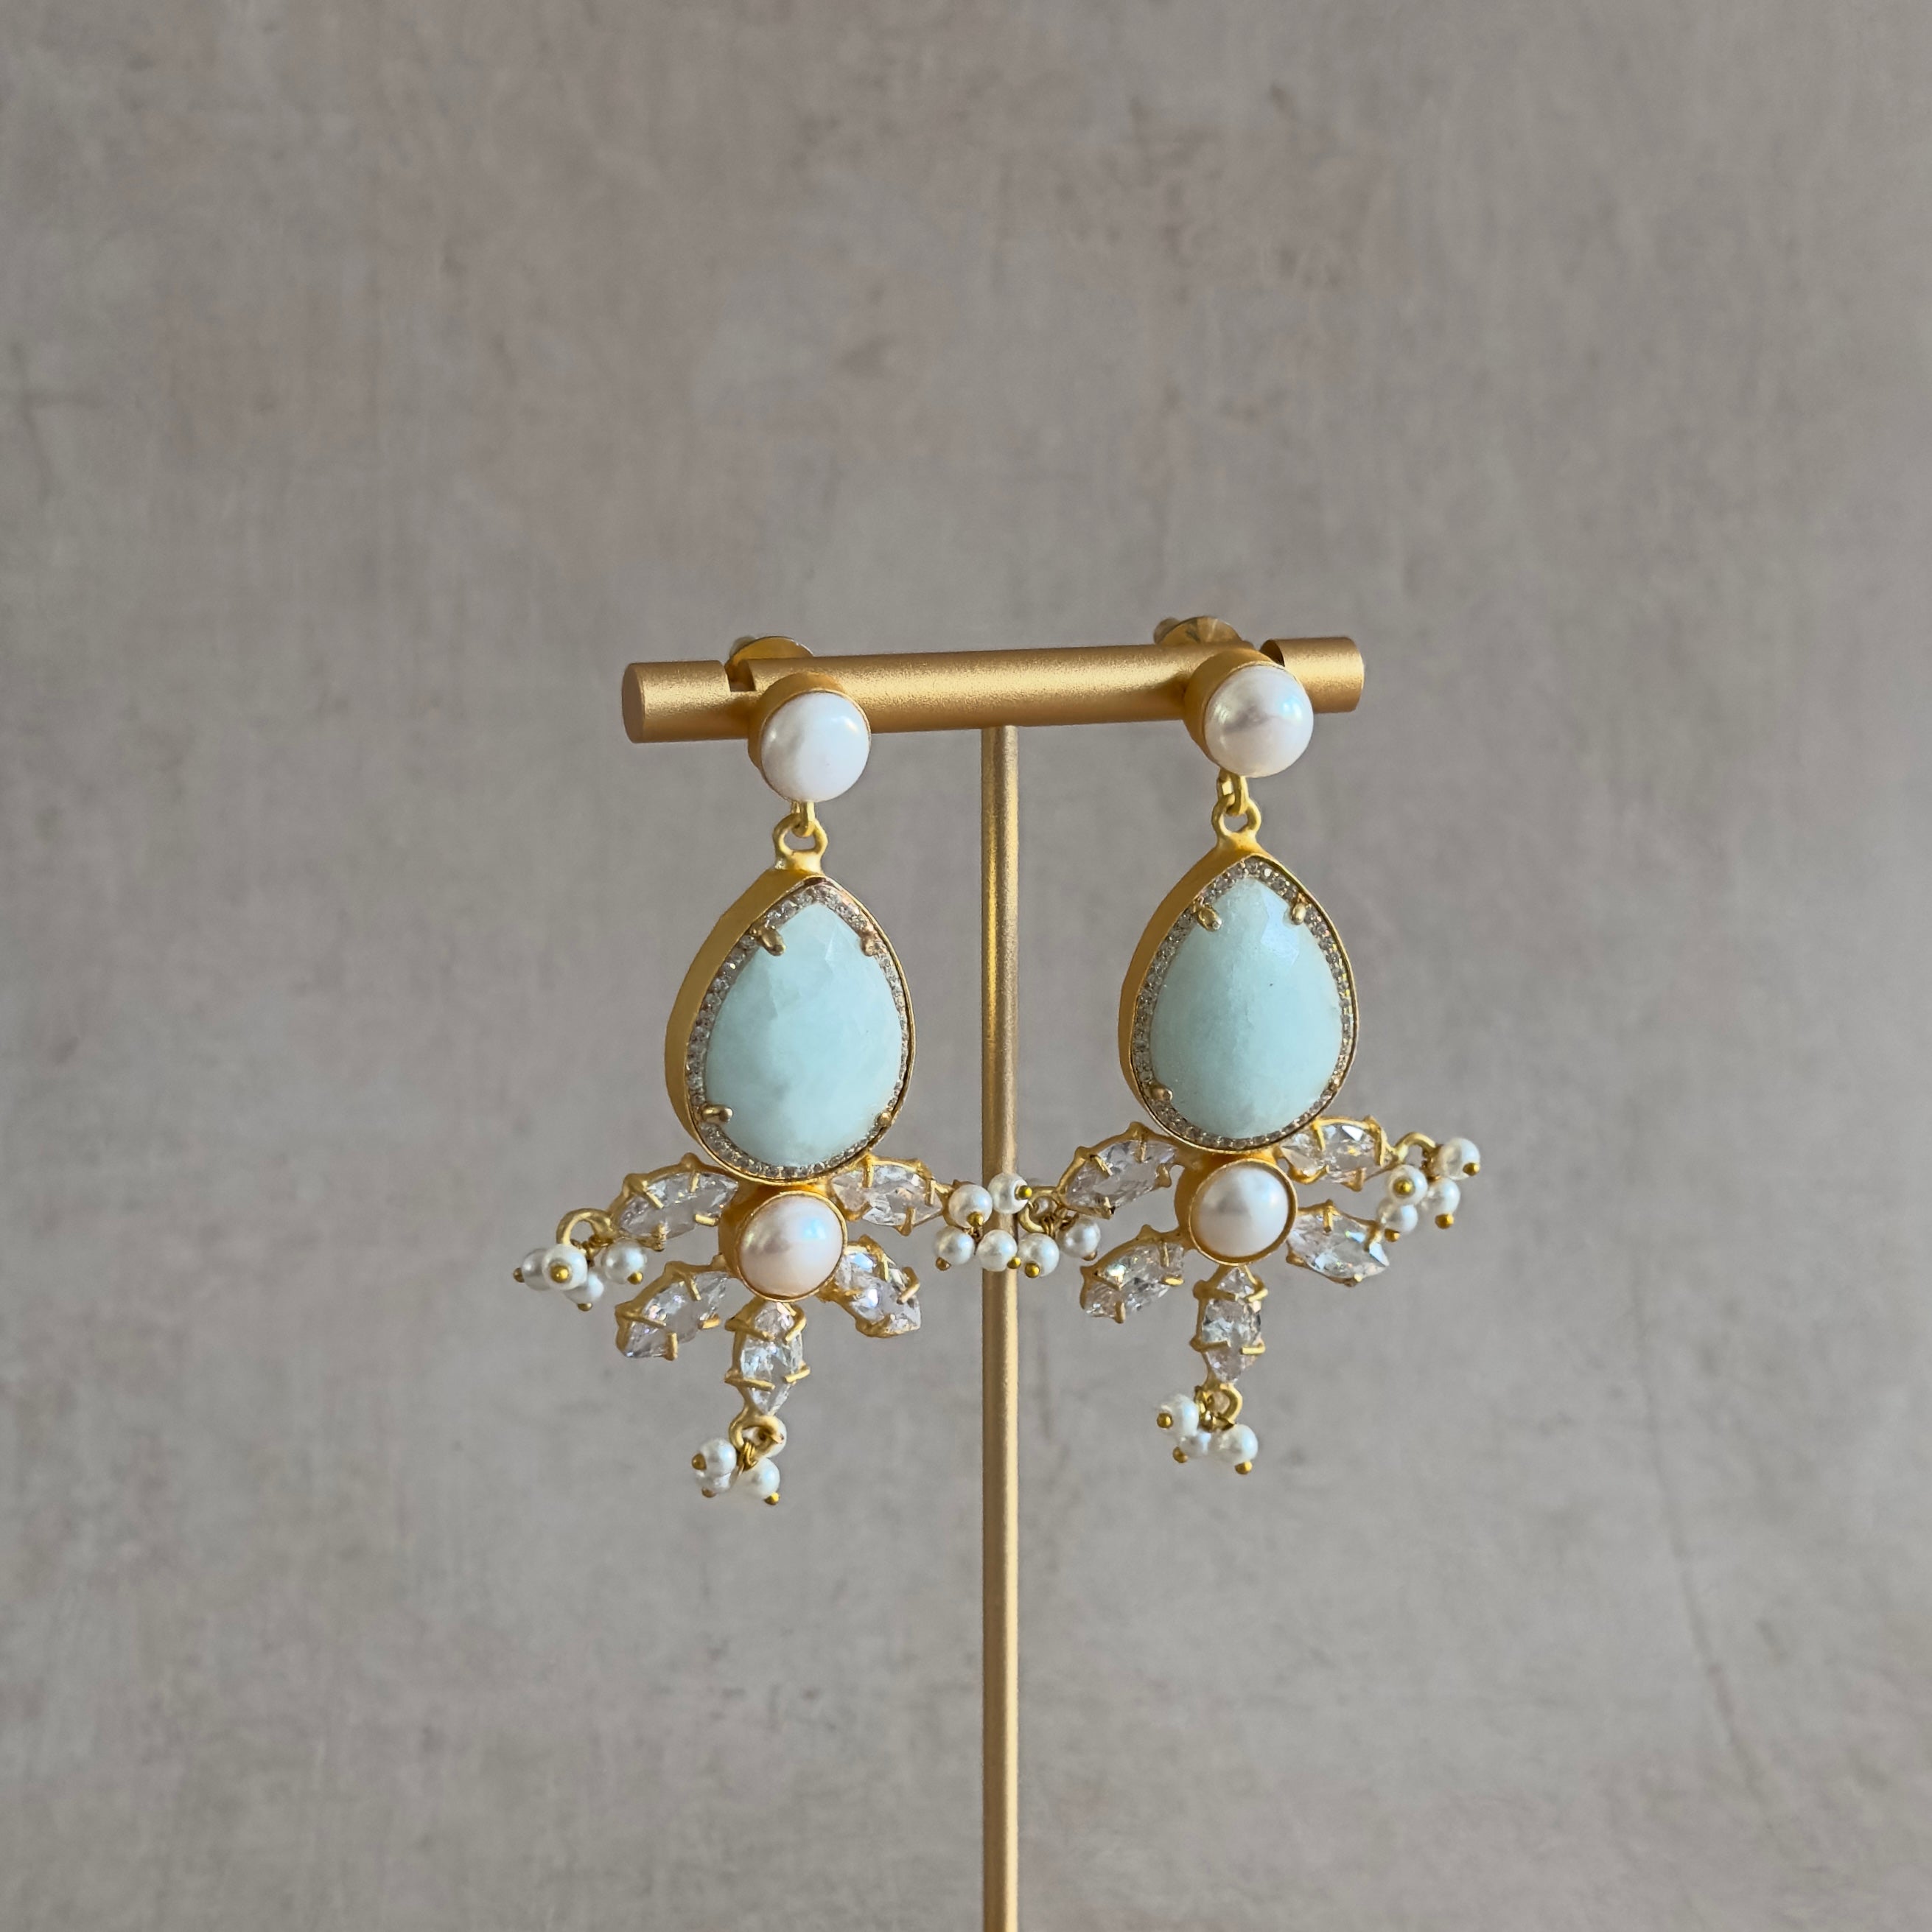 Enhance your look with the elegant hues of jade and pearl in these Simone Crystal Drop Earrings. Featuring luscious CZ crystals, these earrings will add a touch of sophistication and glamour to any outfit. Elevate your style and make a statement with these stunning earrings.